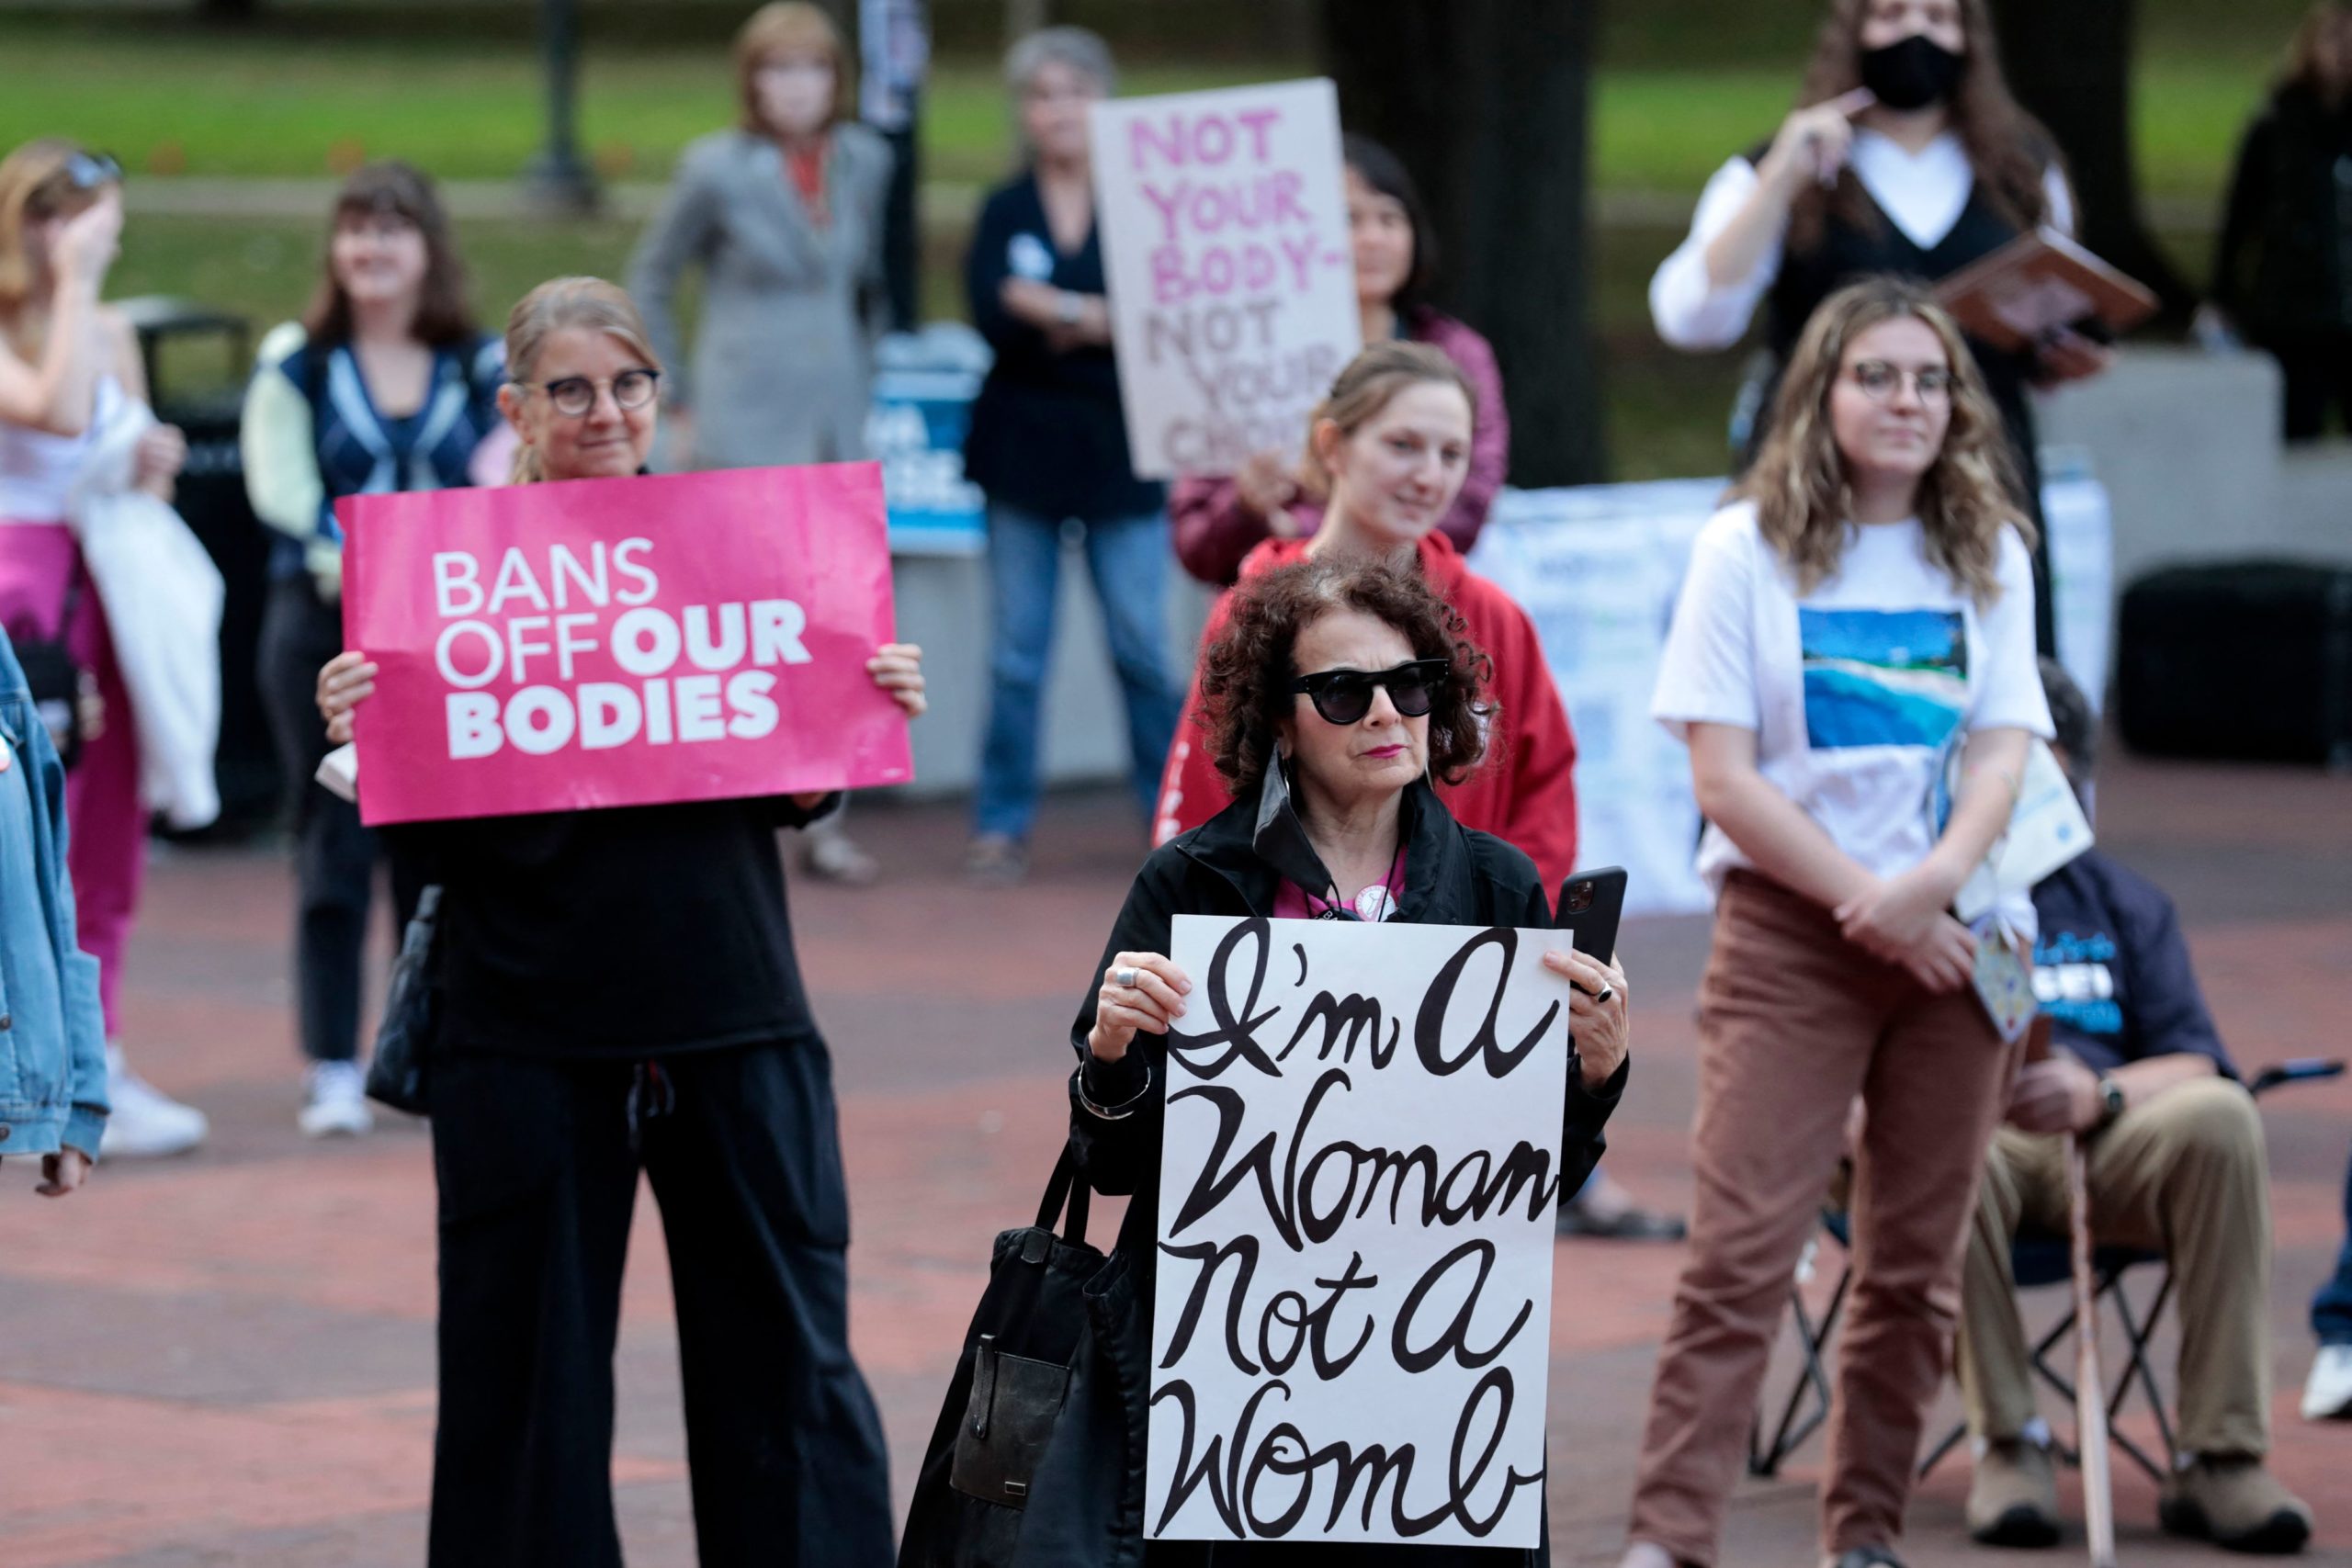 Demonstrators hold signs "Bans Off Our Bodies" as they protest during a rally for reproductive freedom and voting rights on the campus of the University of Michigan in Ann Arbor, Michigan on October 3, 2022.